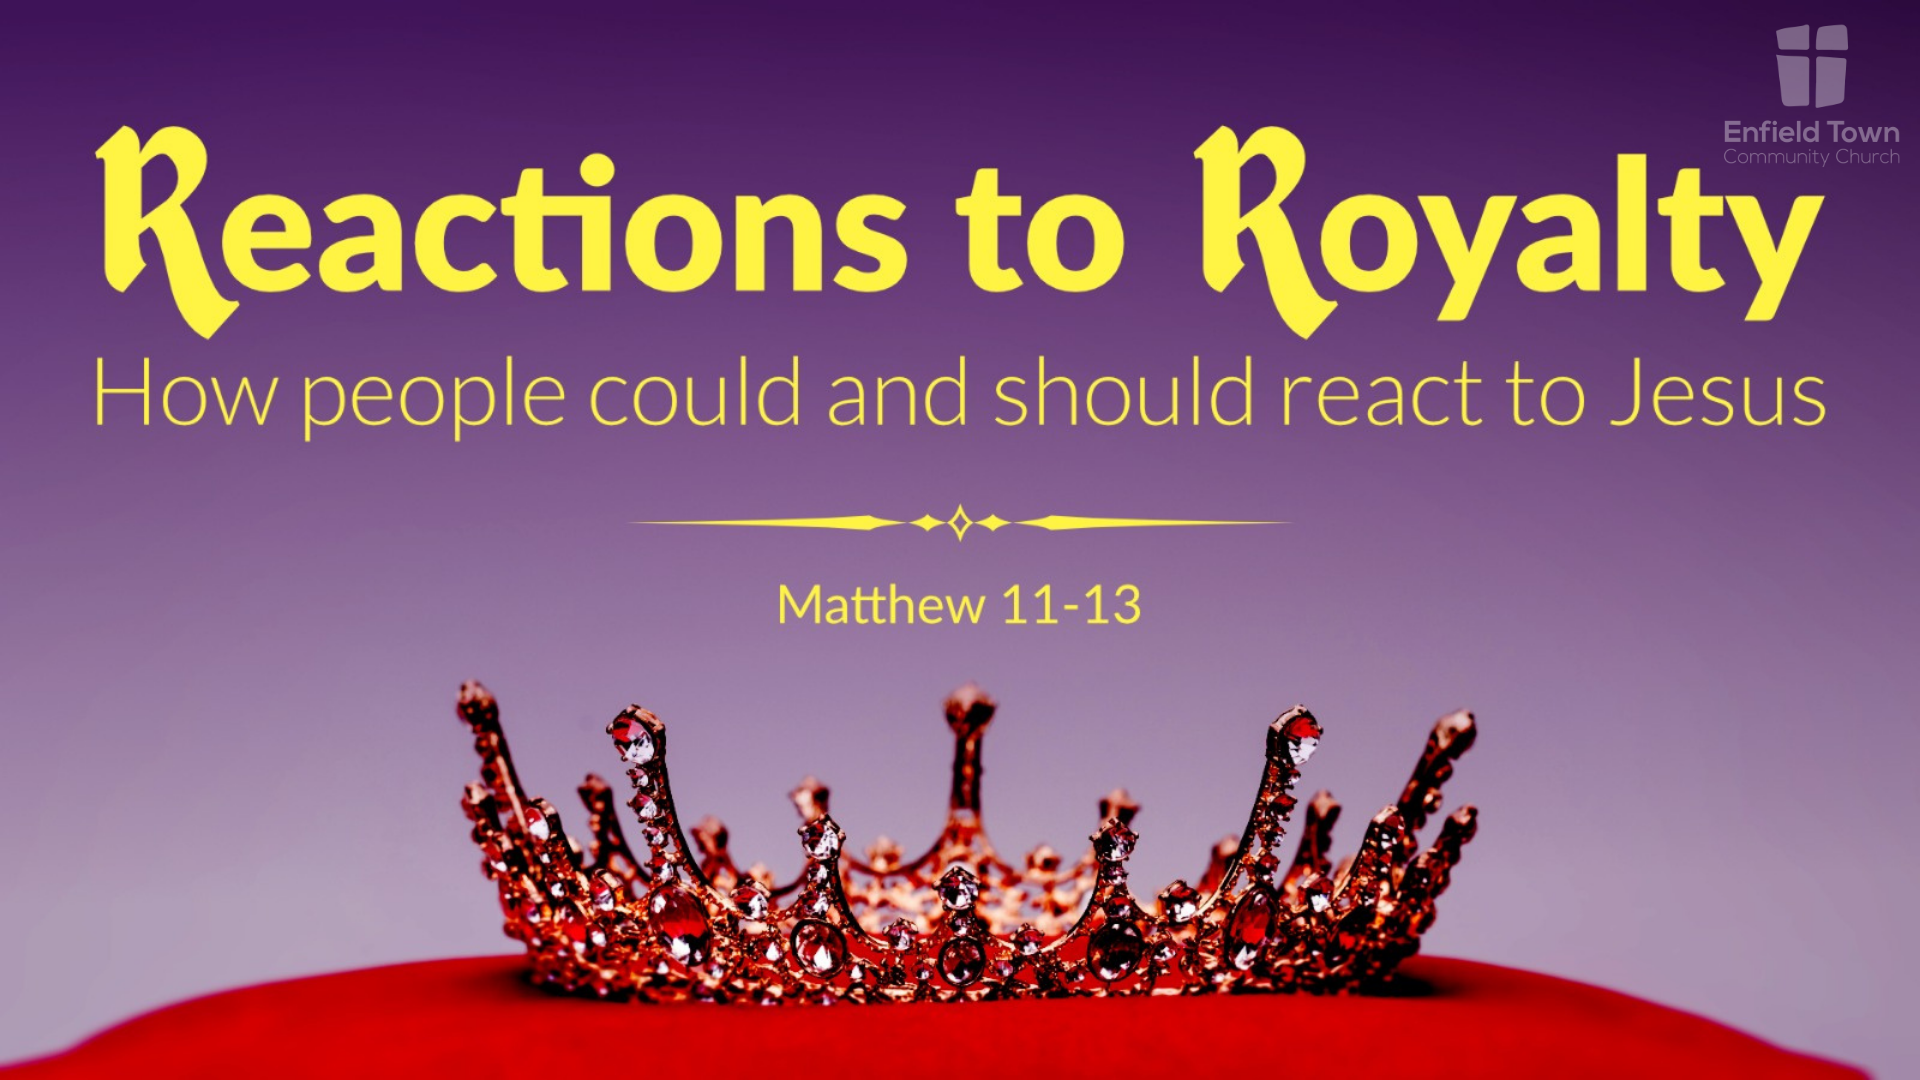 Reactions to Royalty 169 (1)